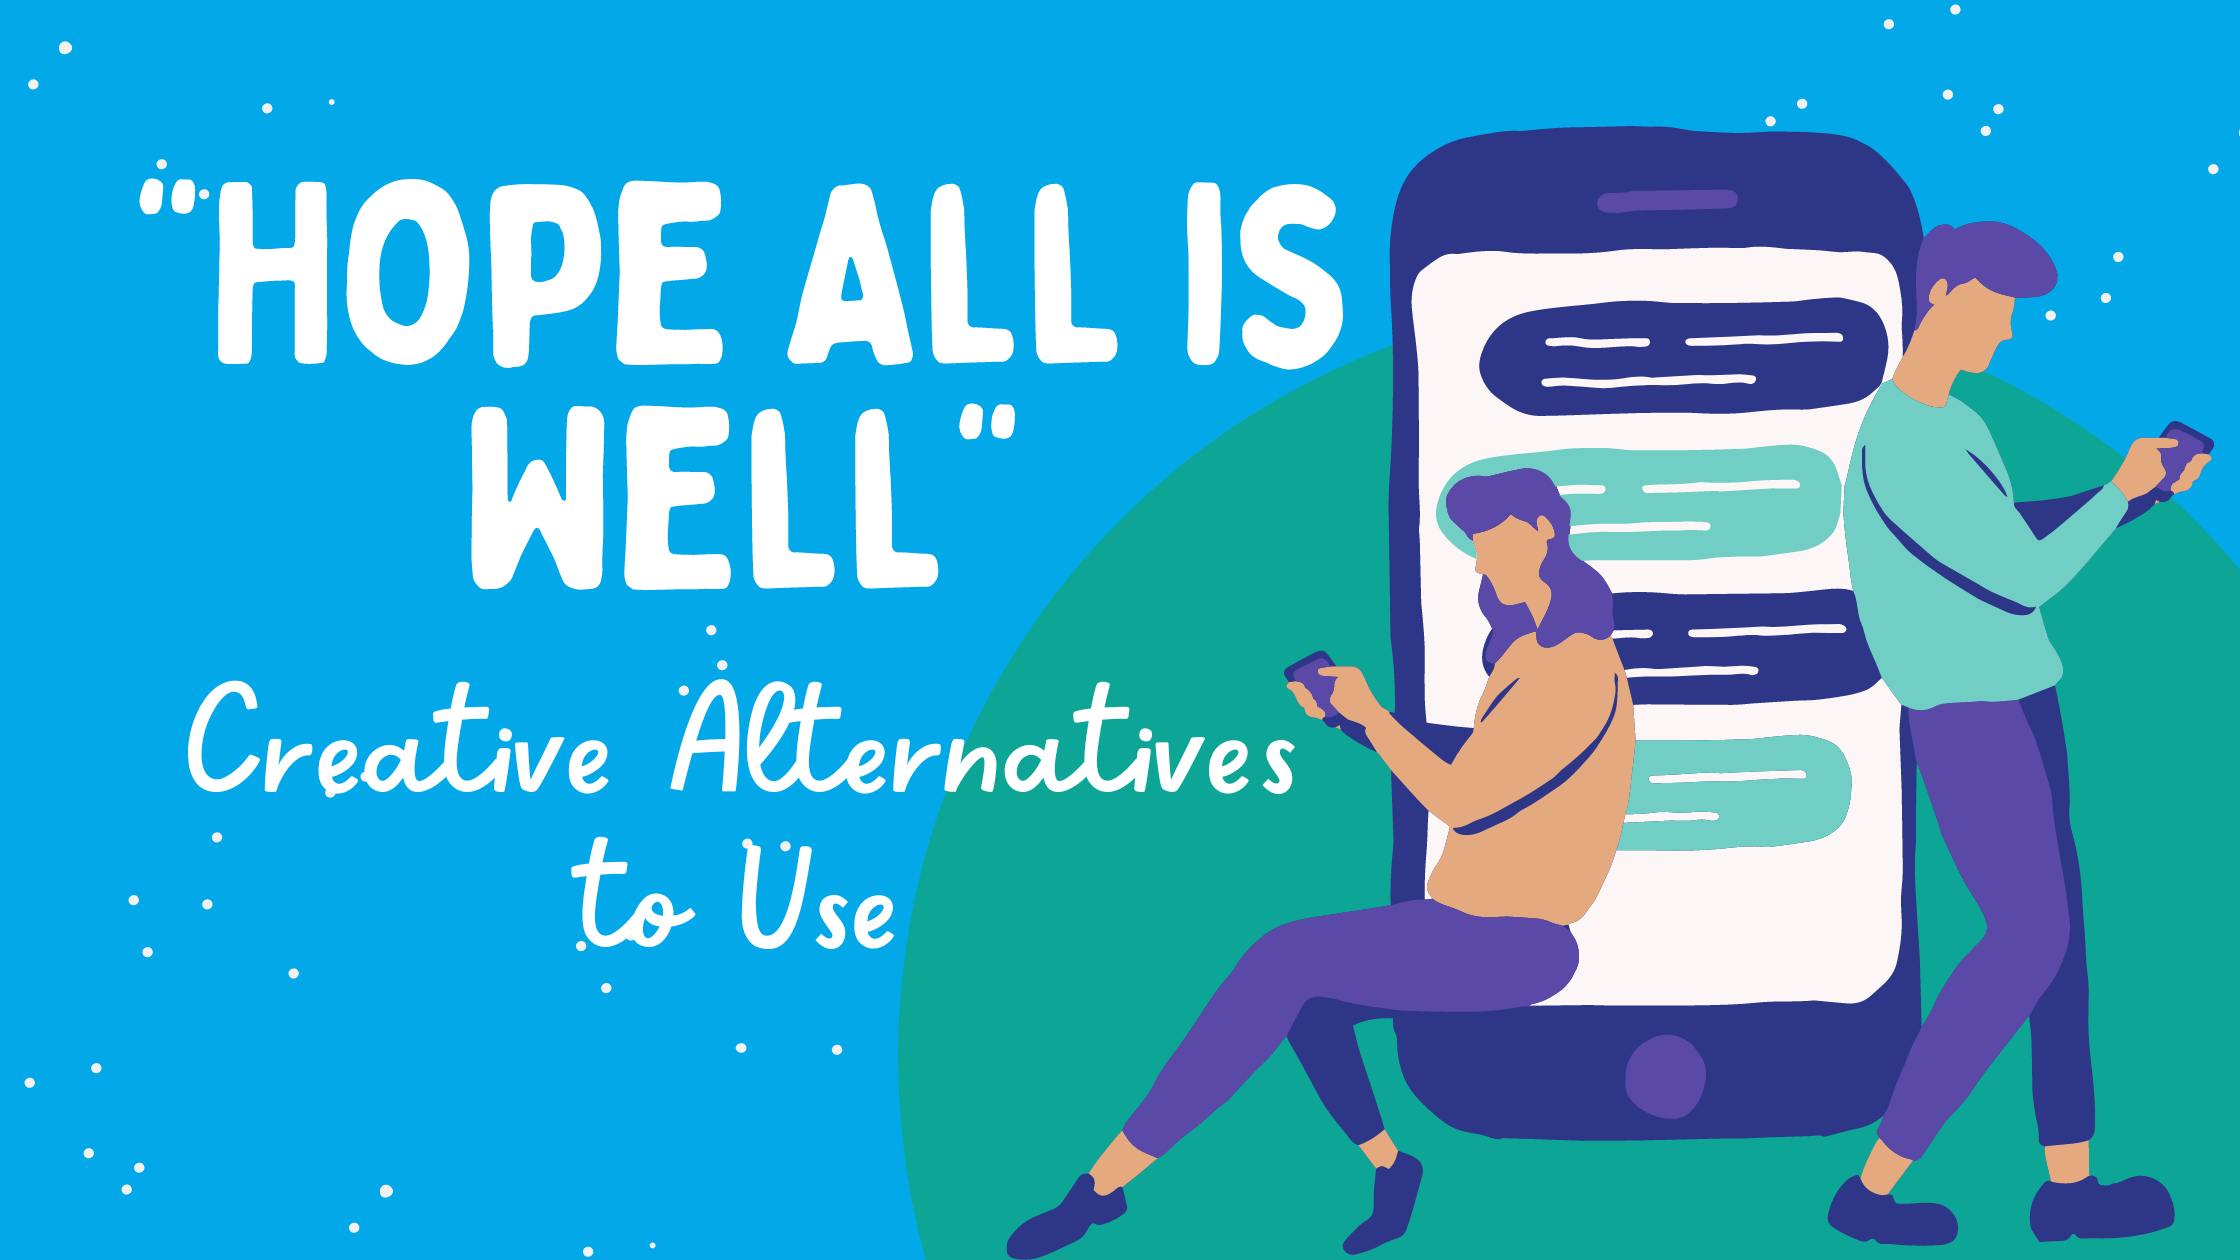 "Hope All is Well": Creative Alternatives to Use